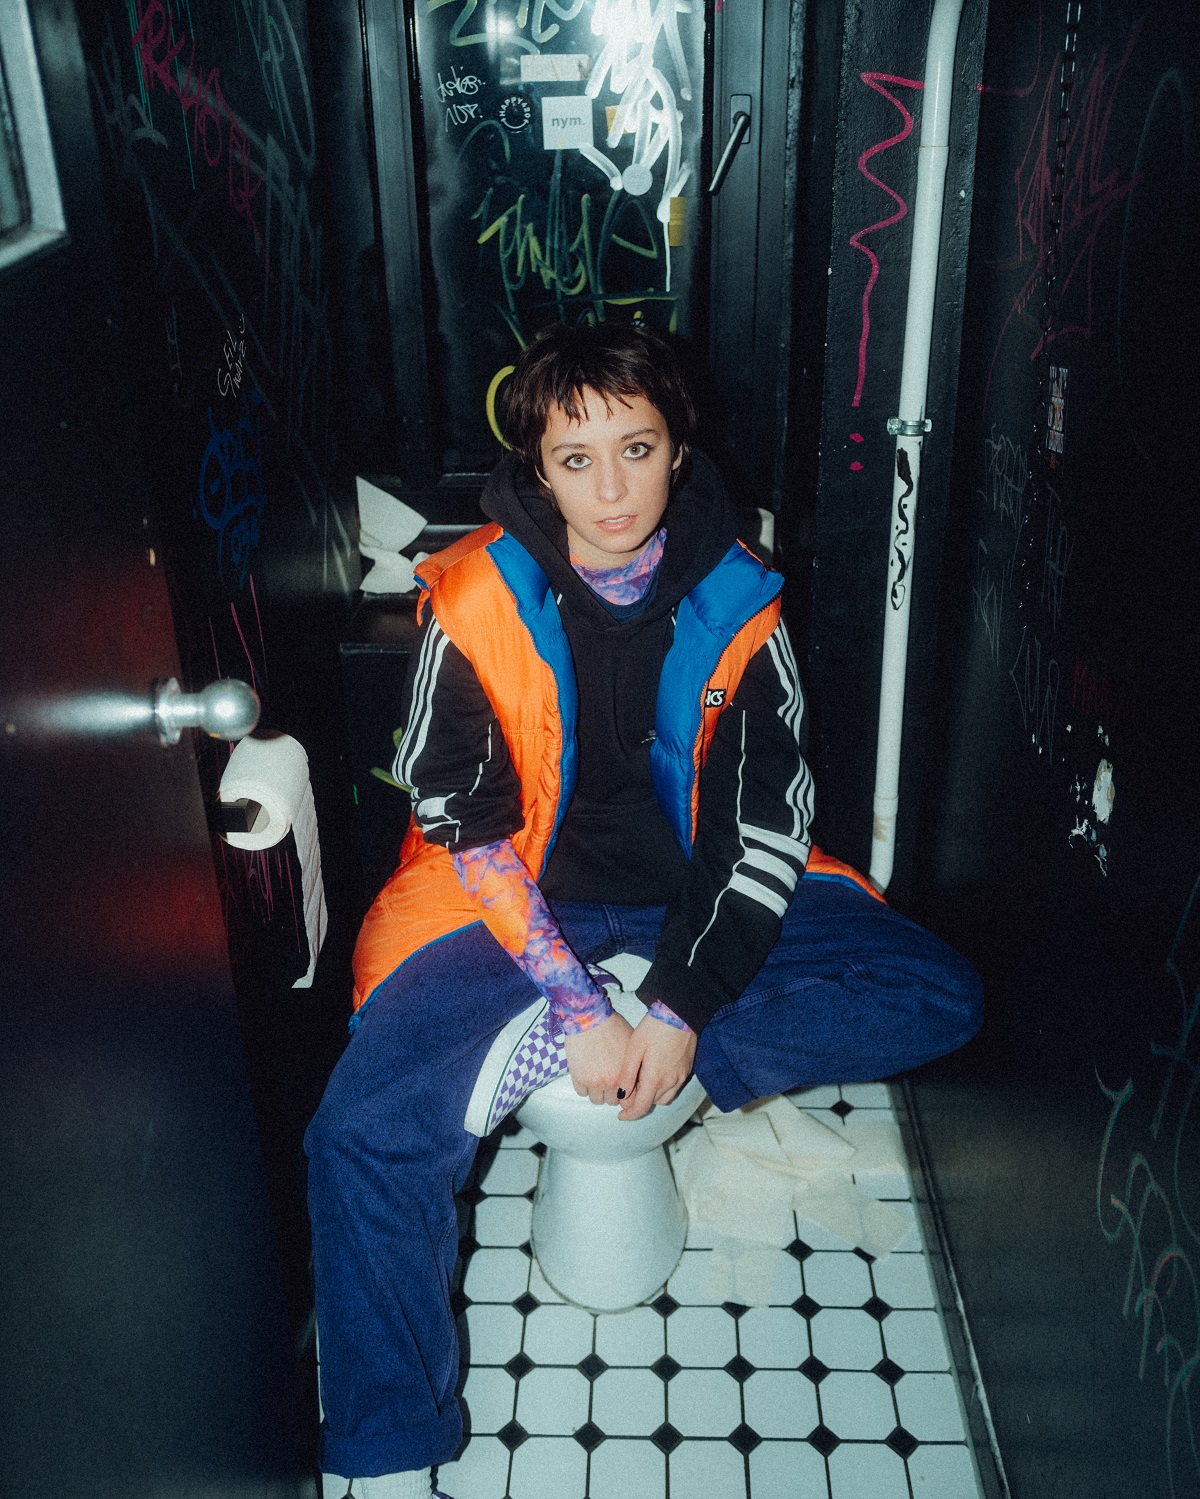 A young woman in athletic clothing sits on the toilet bowl of a pub. The walls are black and scrawled.